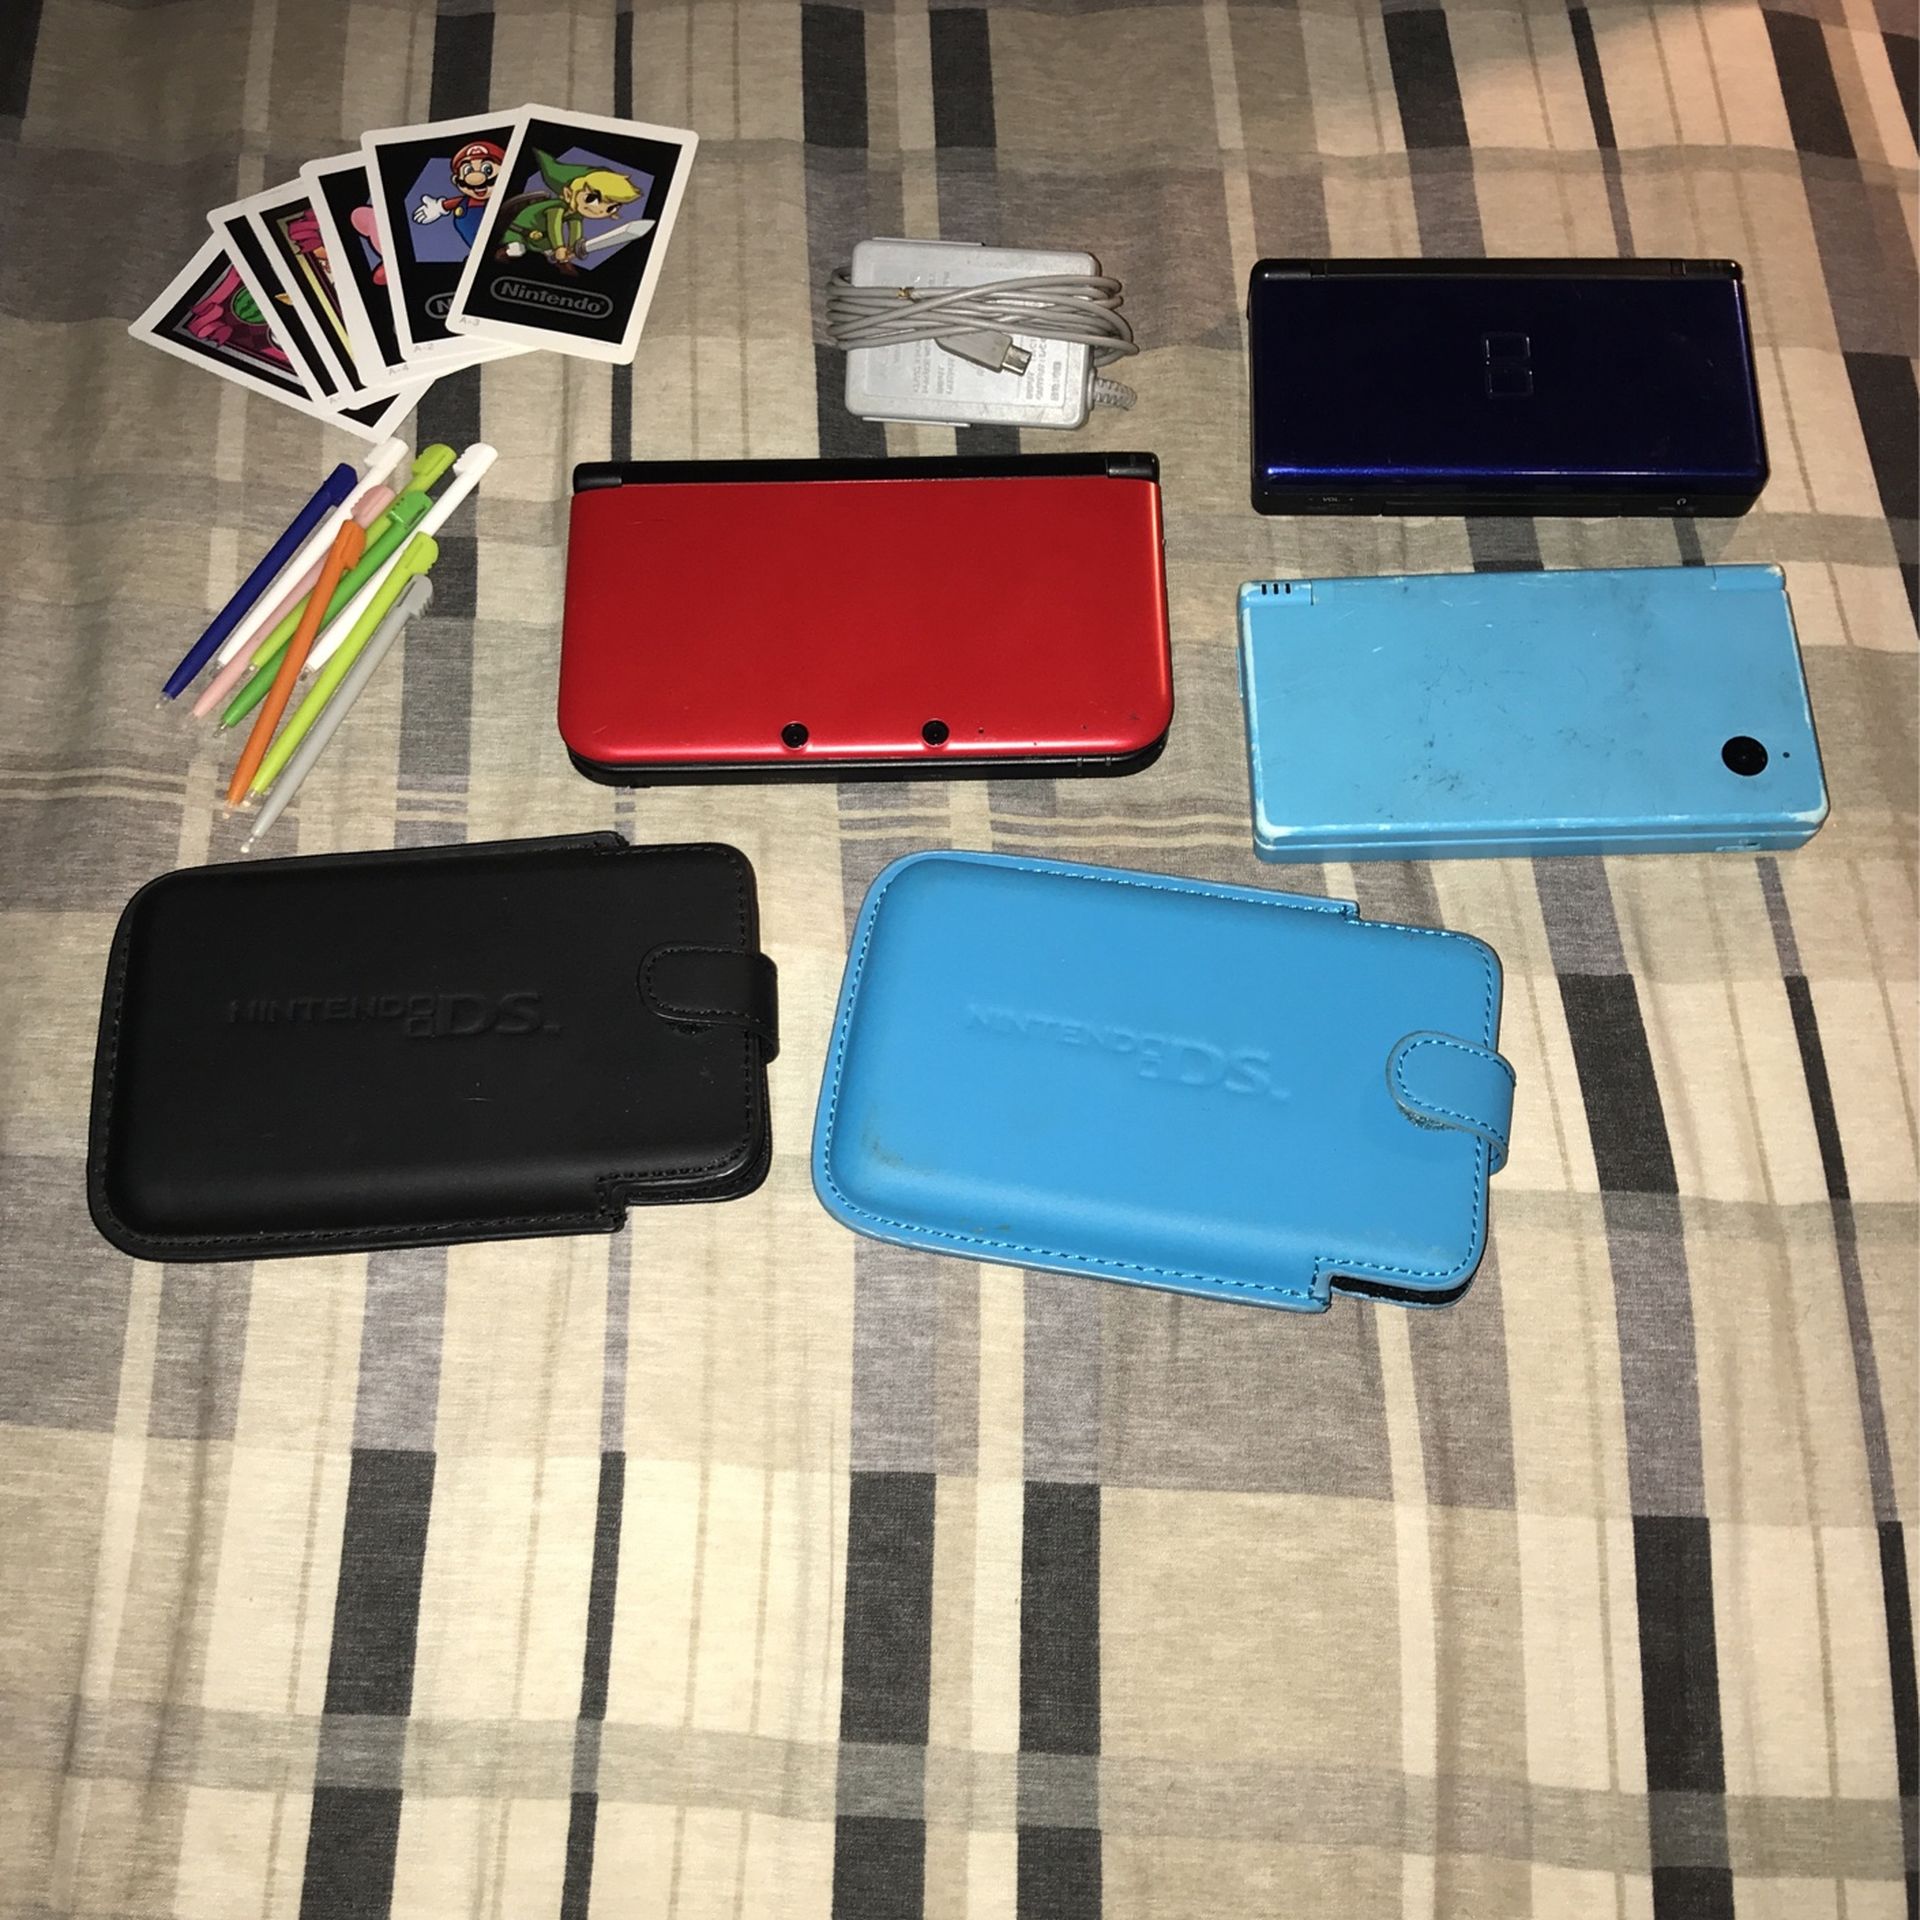 Nintendo Ds Assorted Things